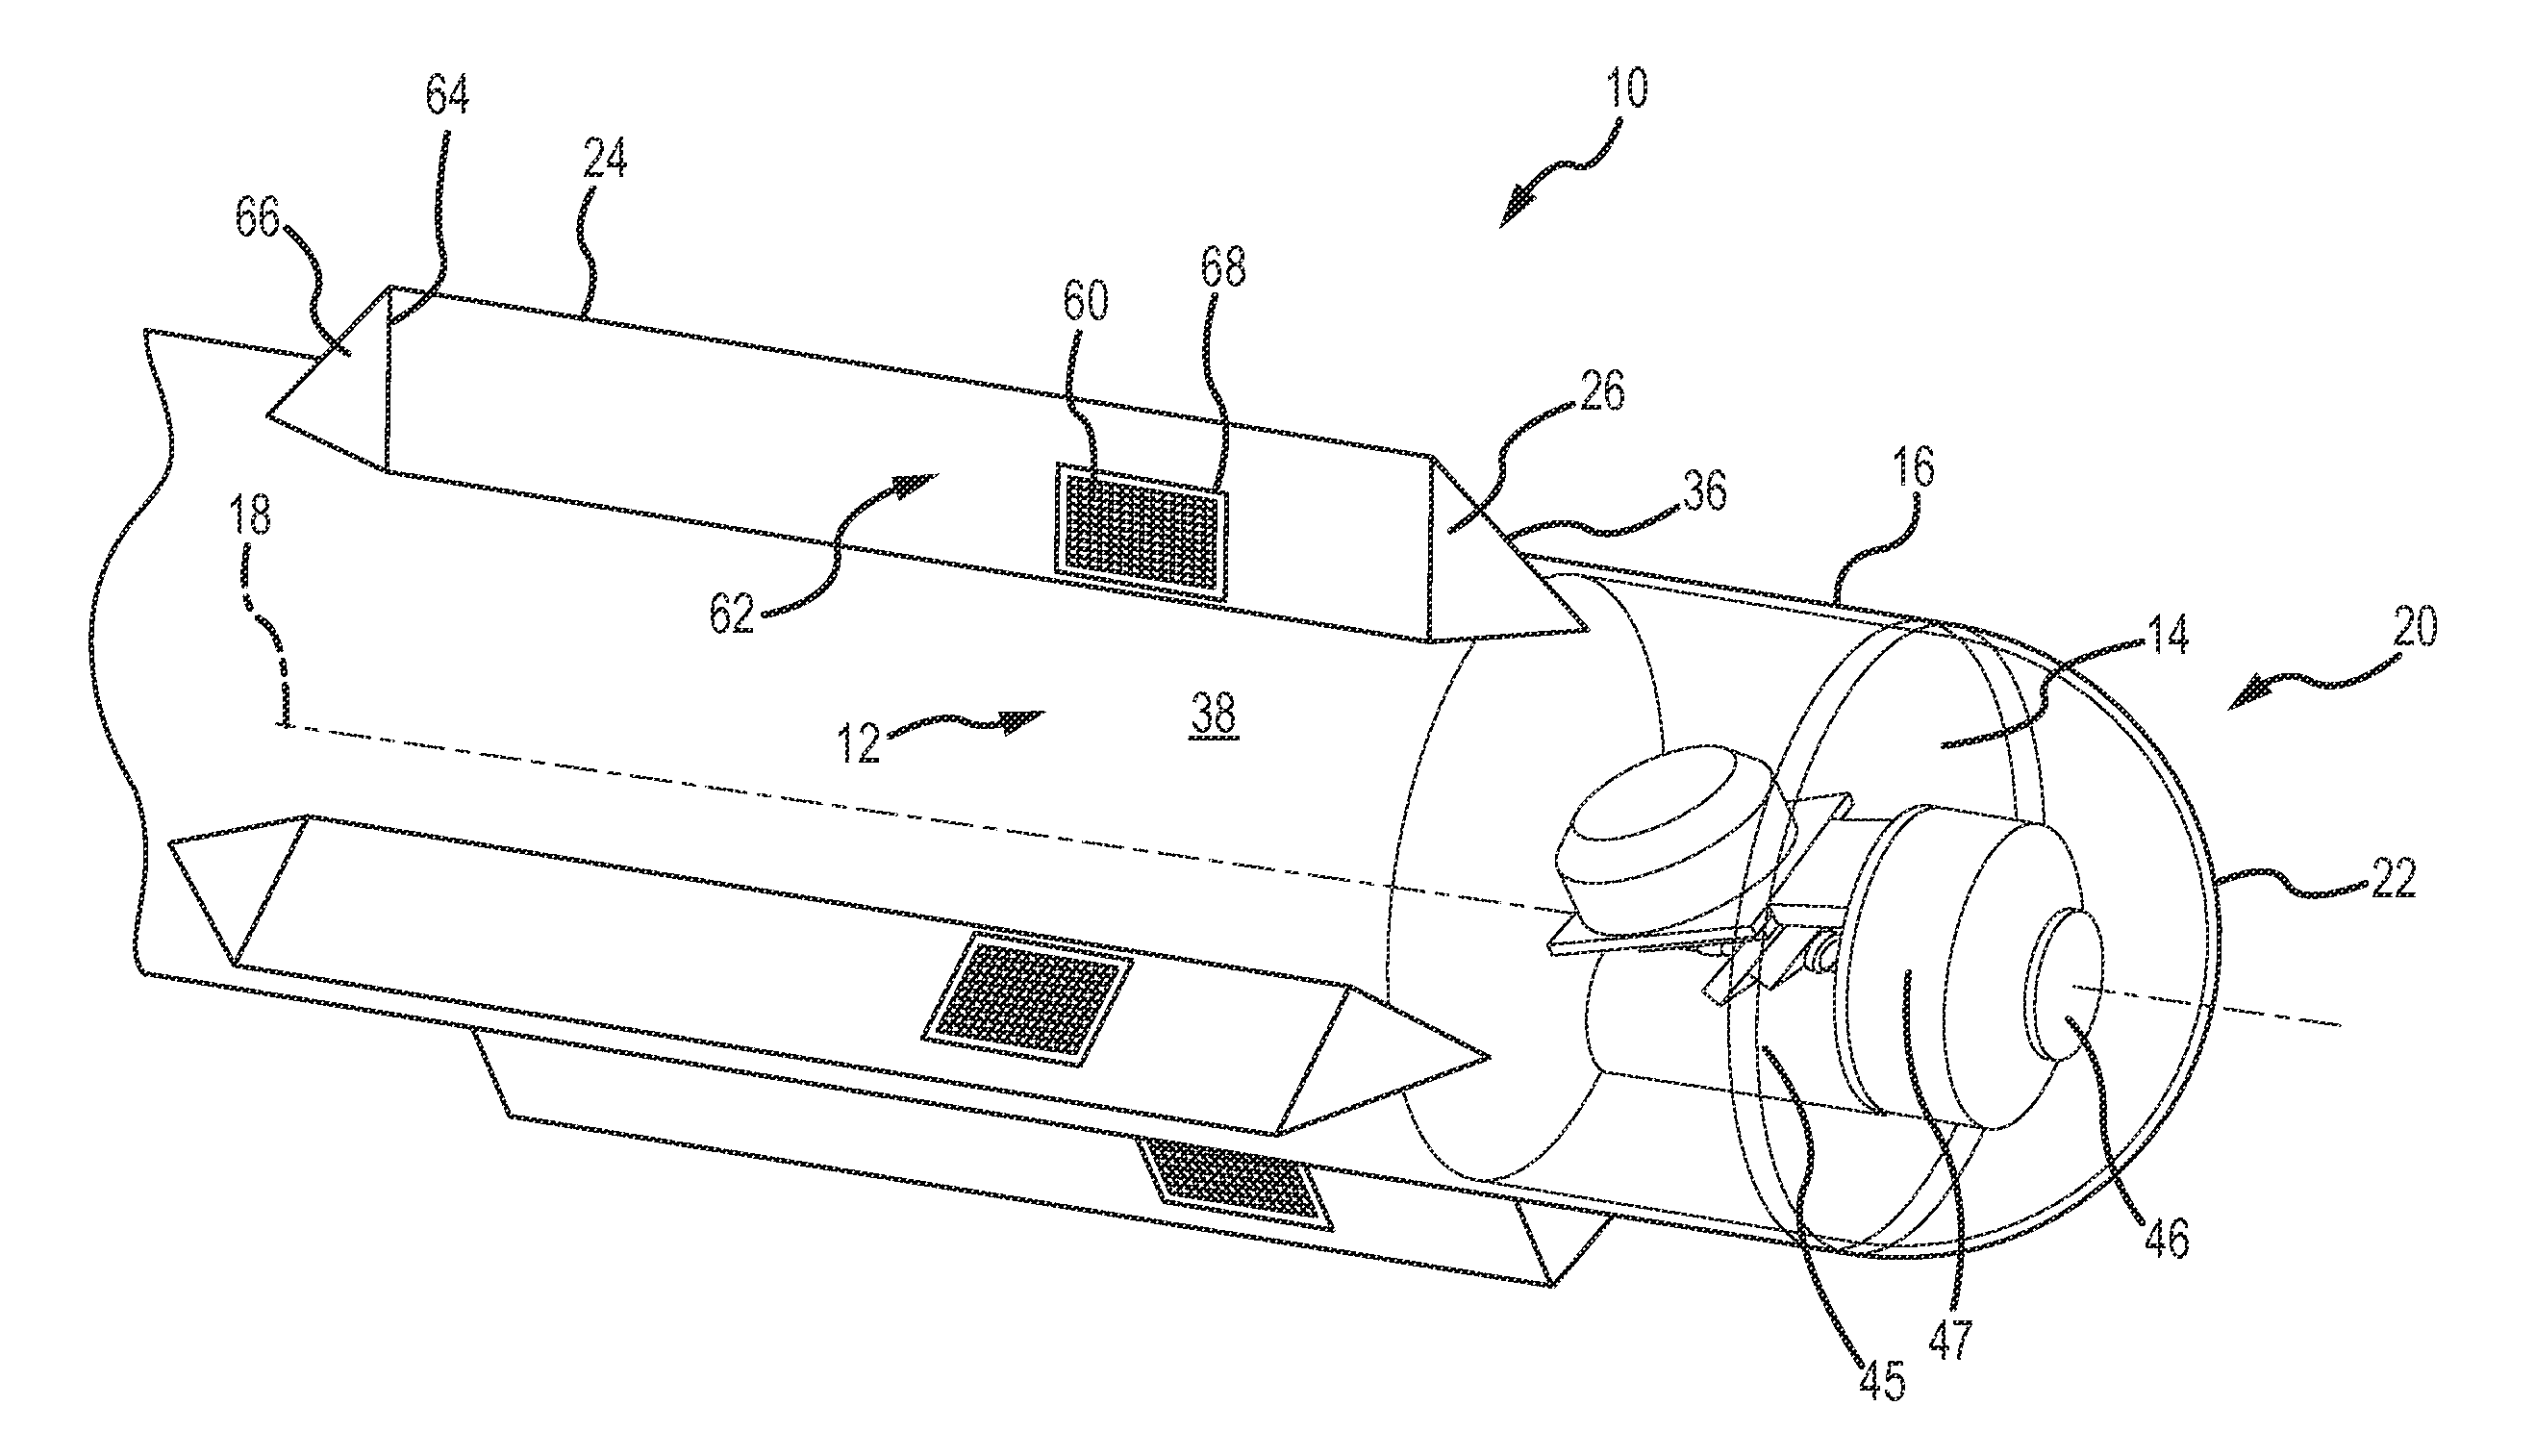 Adaptive electronically steerable array (AESA) system for interceptor RF target engagement and communications